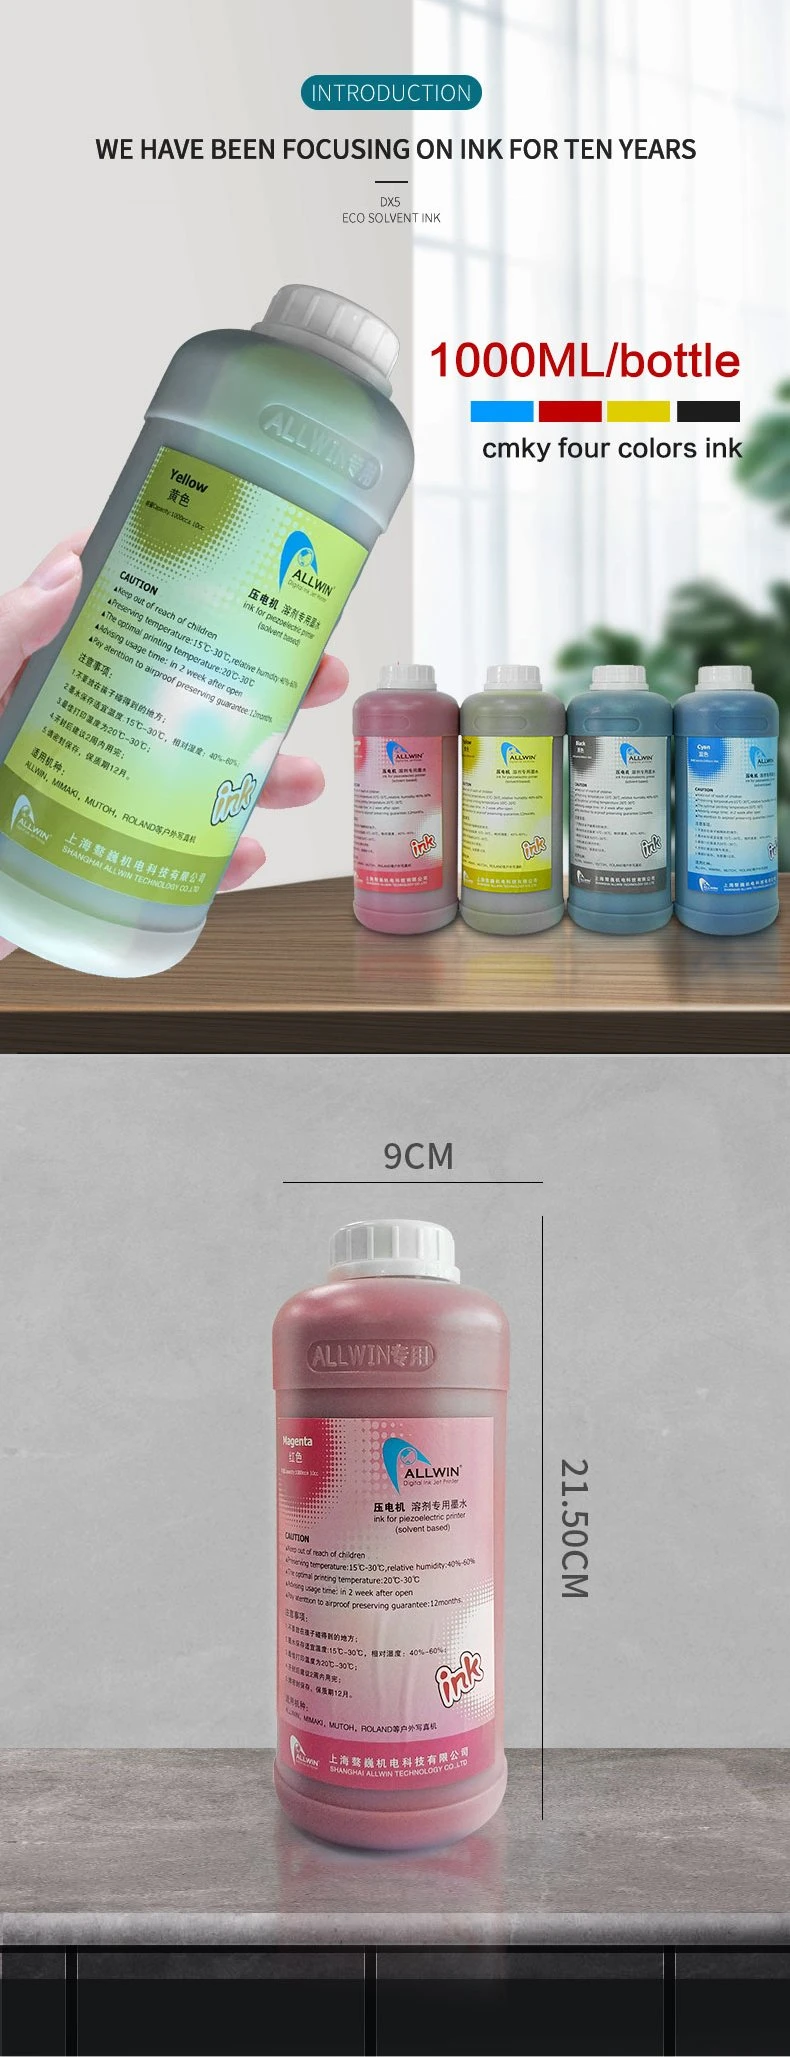 Printer Dx5 Allwin Eco Solvent Ink for Eco Solvent Machine